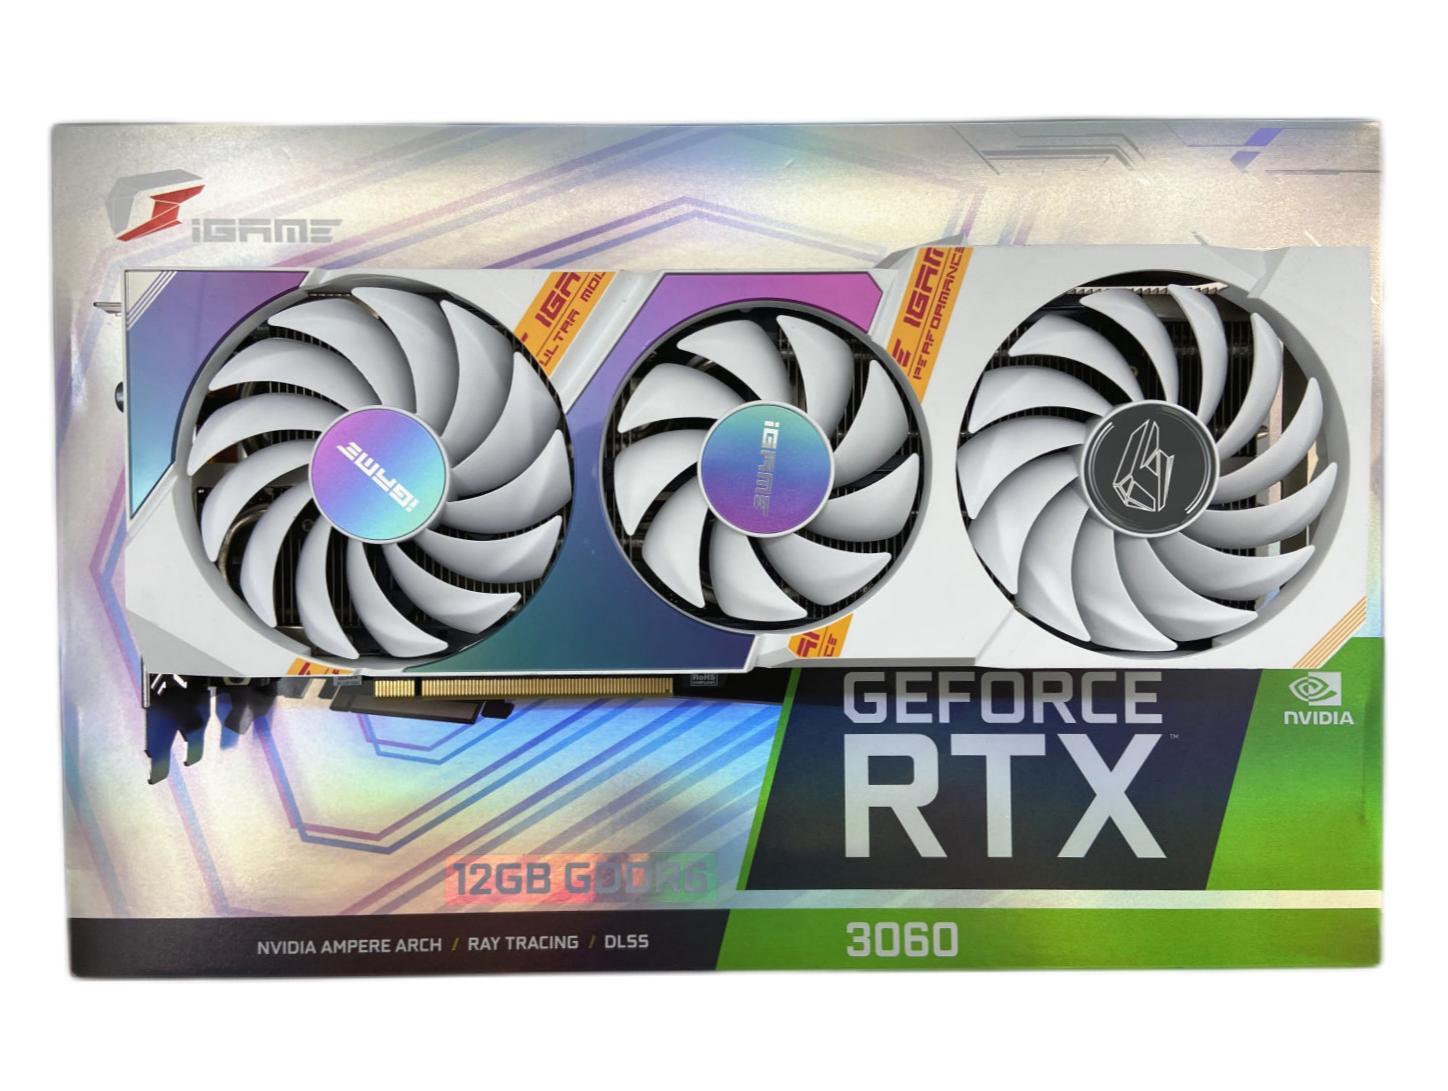 Rtx 3060 colorful ultra w 12g. RTX 3060 12gb colorful IGAME. Colorful IGAME GEFORCE RTX 3060 ti Ultra w OC. Colorful видеокарта GEFORCE RTX 3060 12 ГБ (IGAME GEFORCE RTX 3060 Ultra w OC 12g l-v), LHR трубки. Colorful видеокарта GEFORCE GTX 3060 12 ГБ.